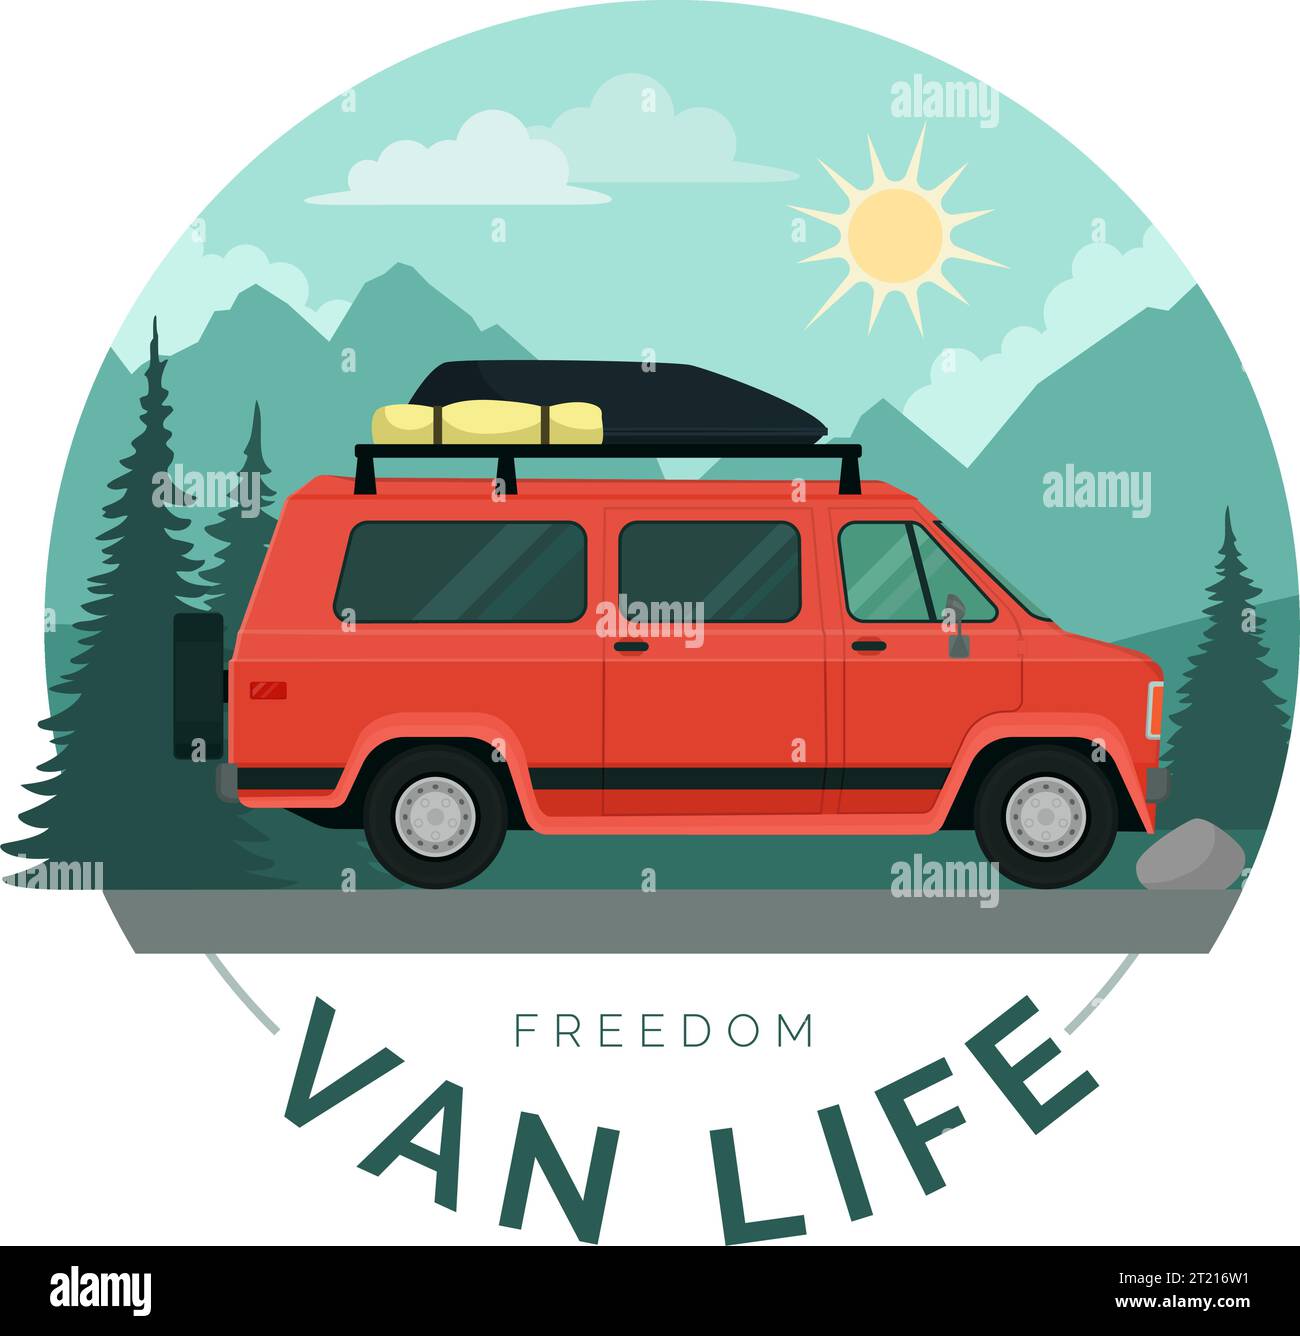 Van life and travel: van and mountain landscape background, isolated badge Stock Vector